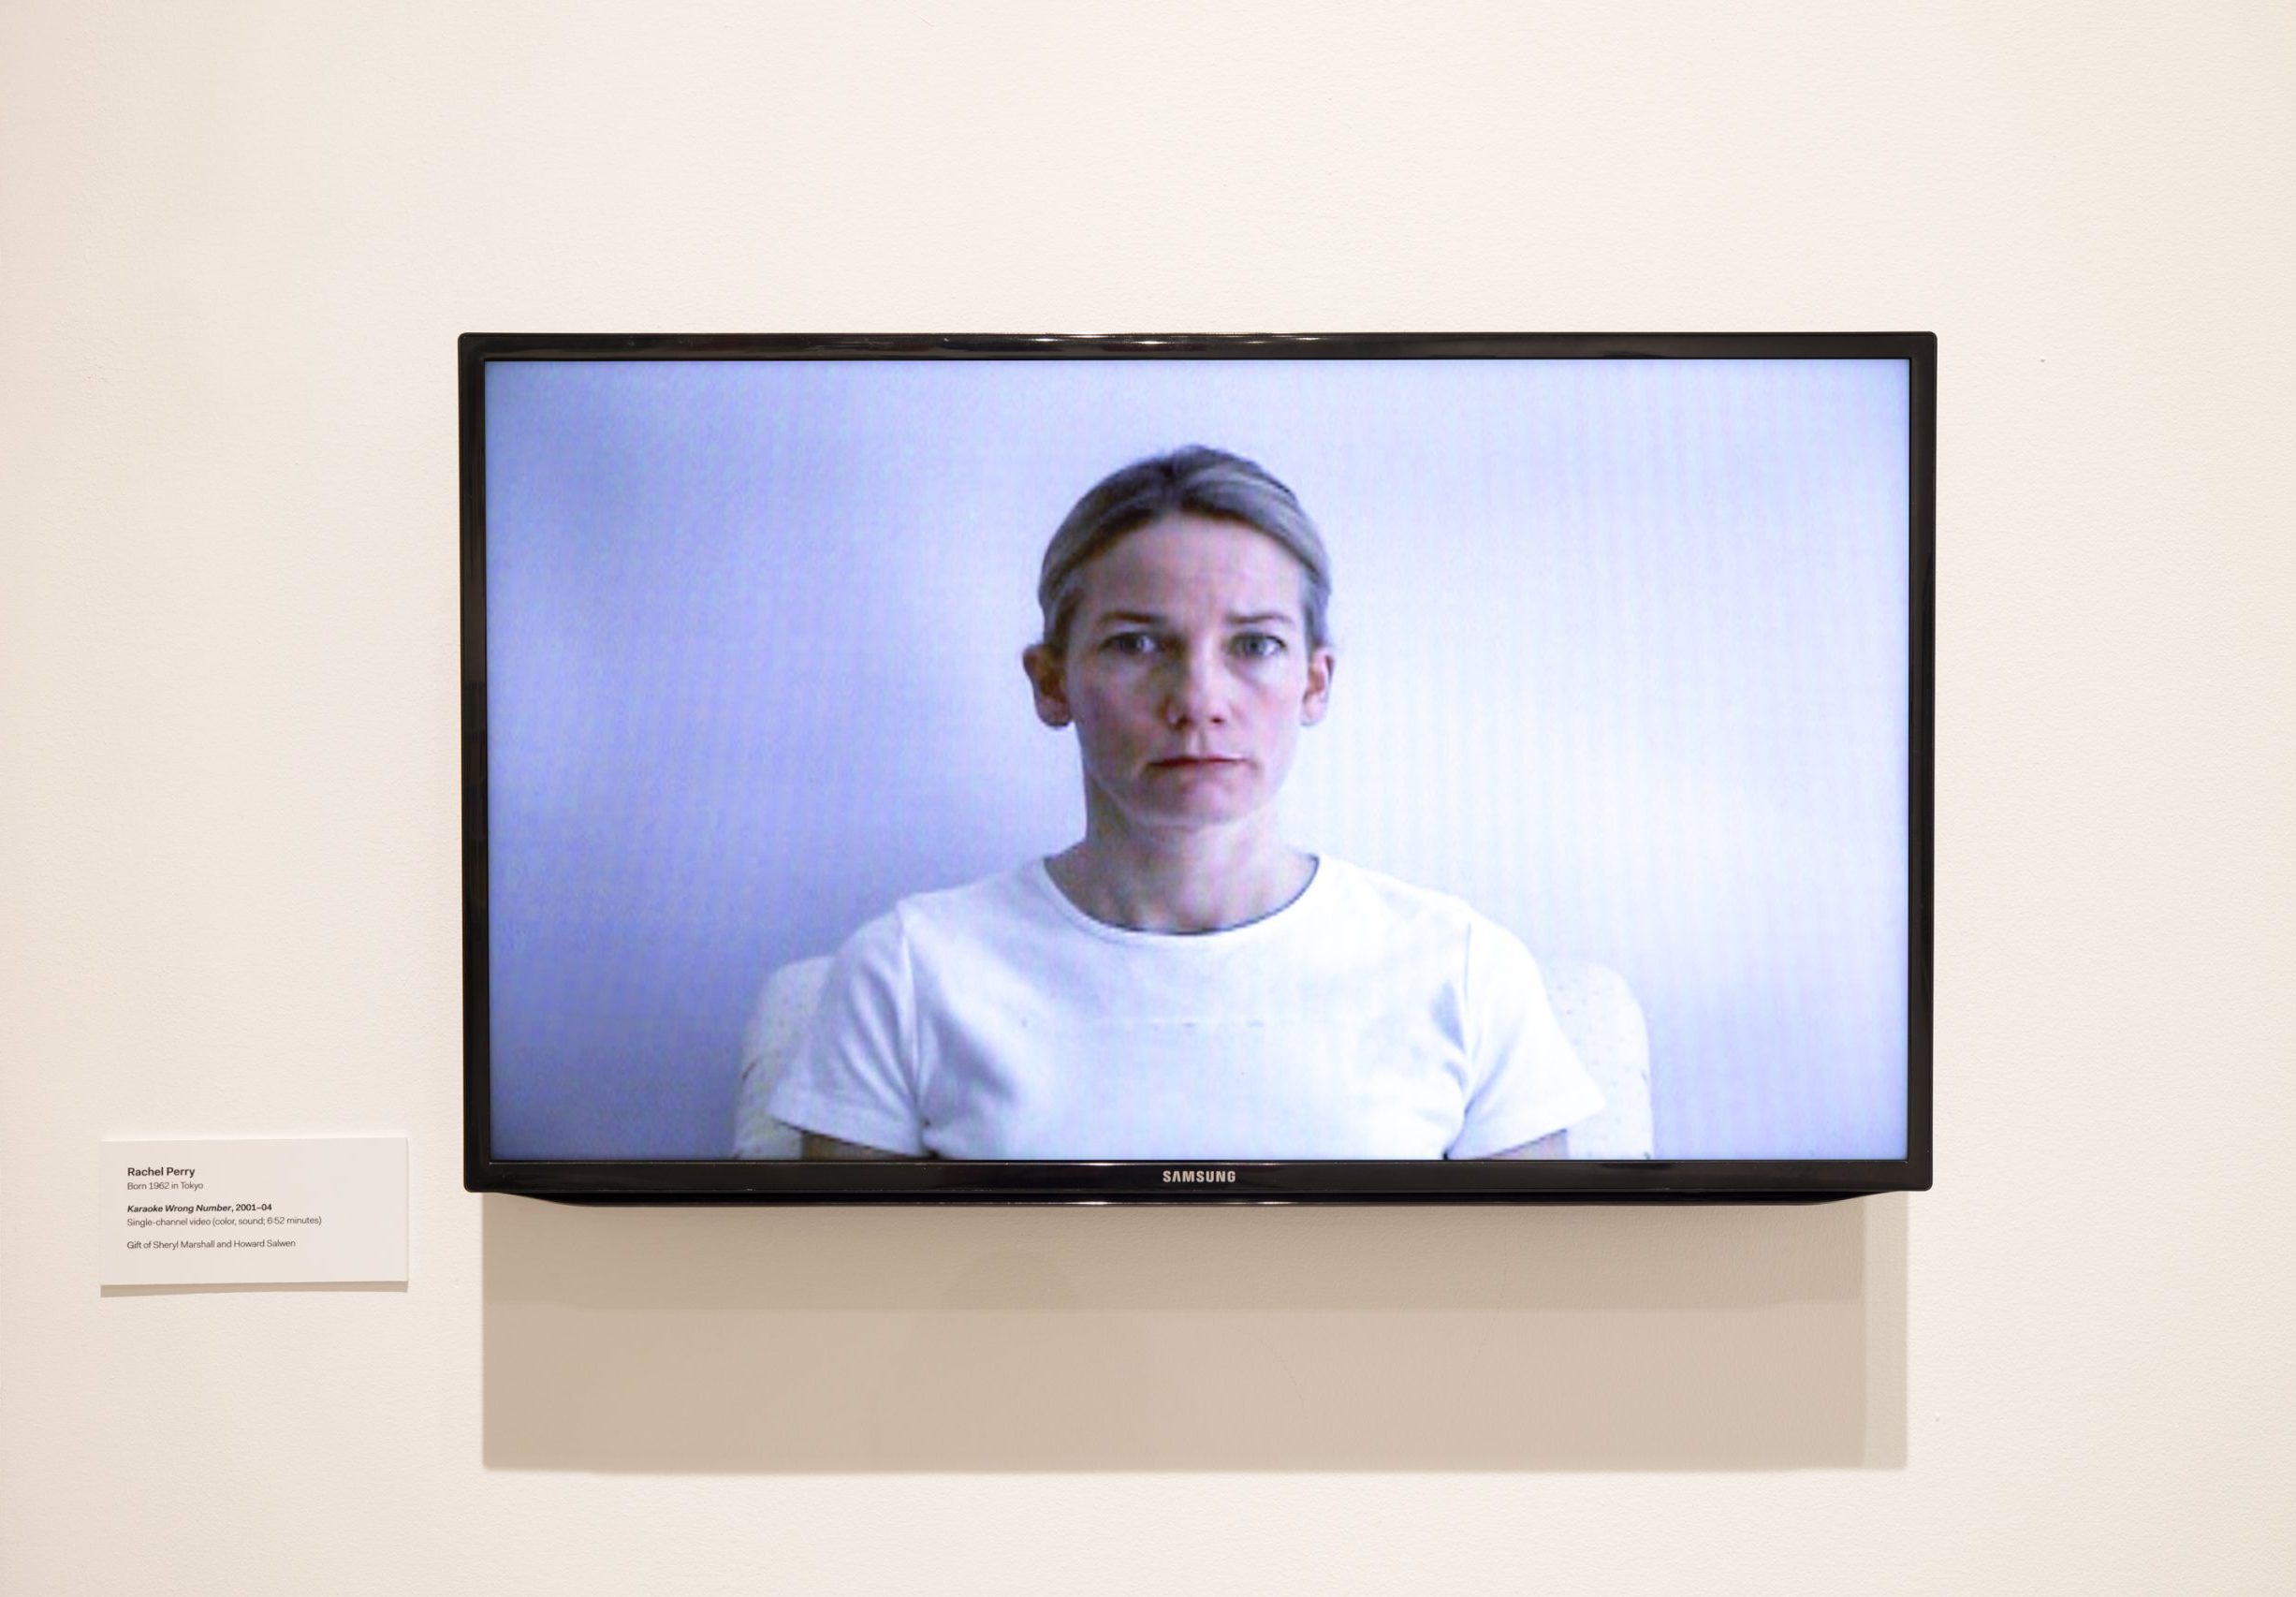 A TV screen displaying a woman in a white shirt against a white background